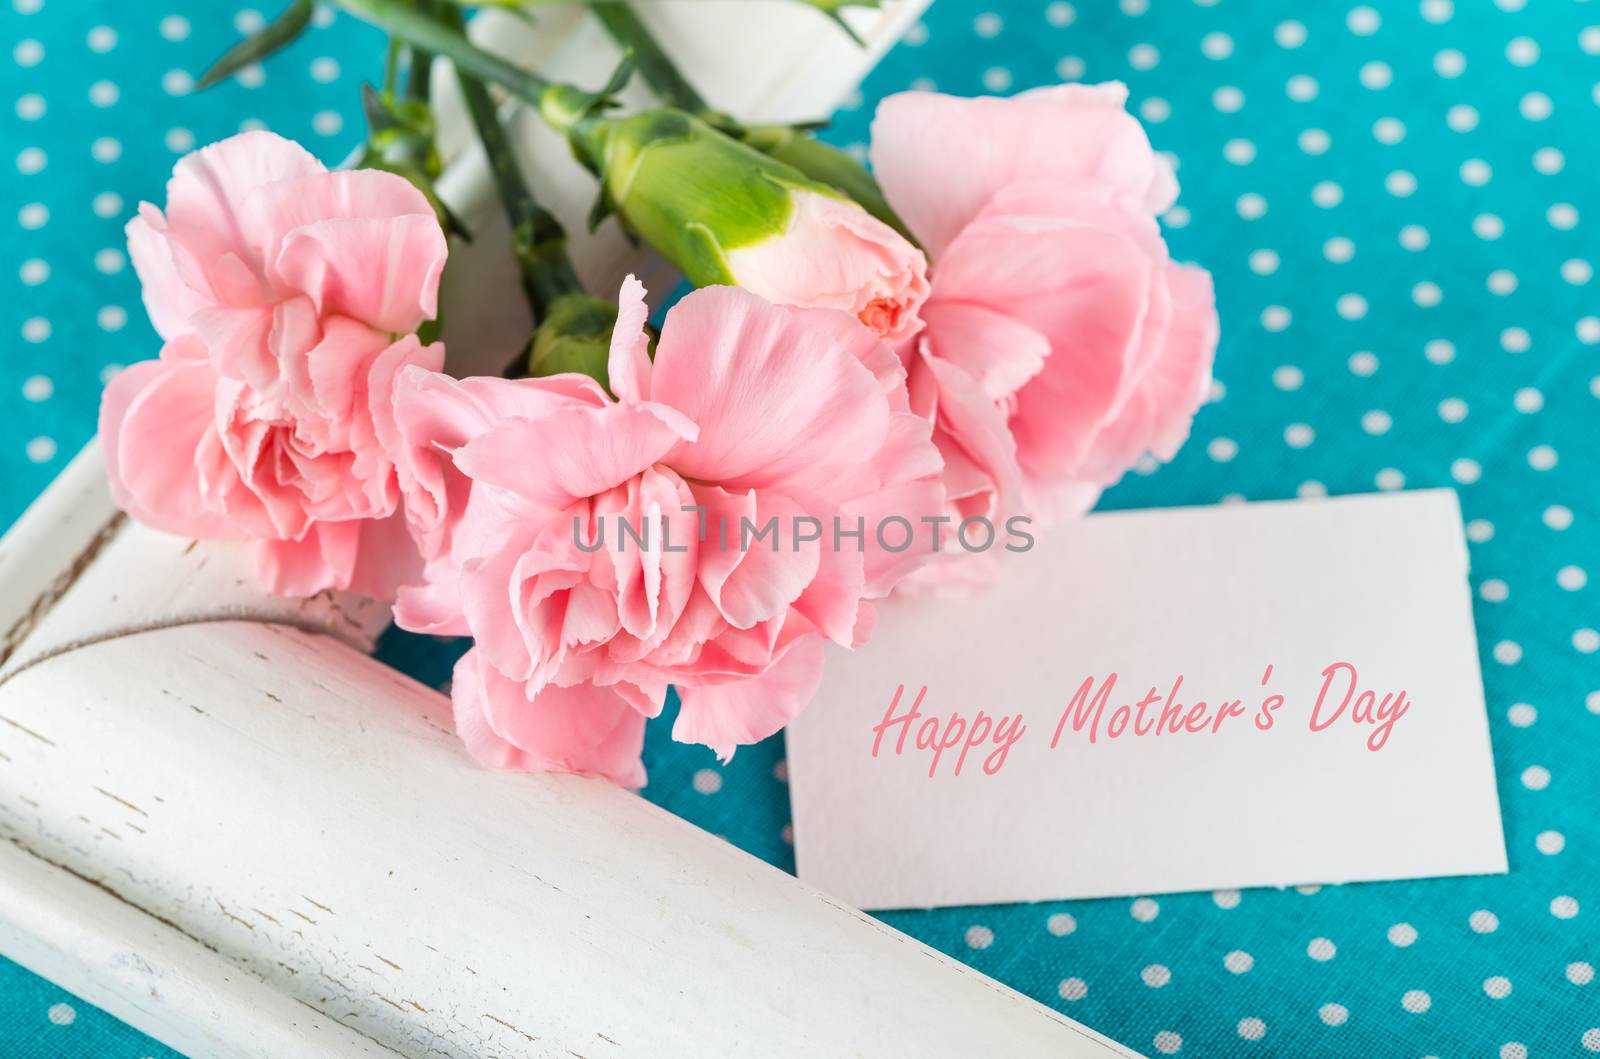 Greeting card with the inscription Happy Mothers Day with pink carnations on a bright blue background with white polka dots